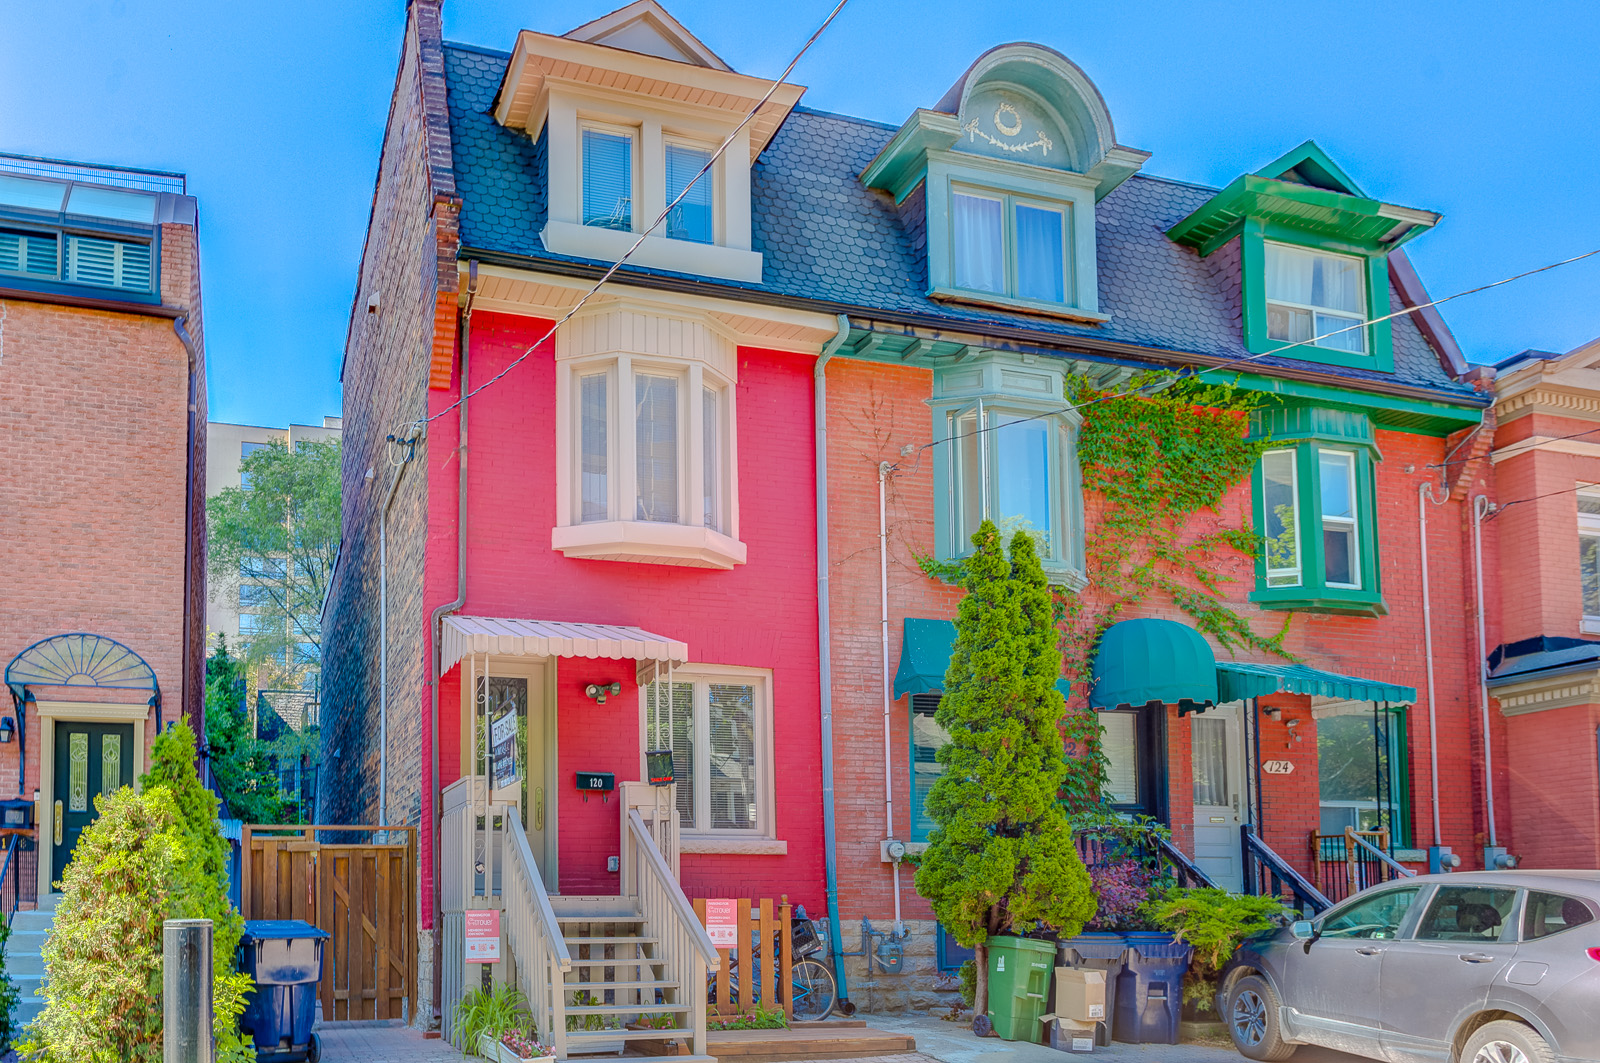 Colourful 3-storey Victorian house for sale showing popularity of houses in February 2021.